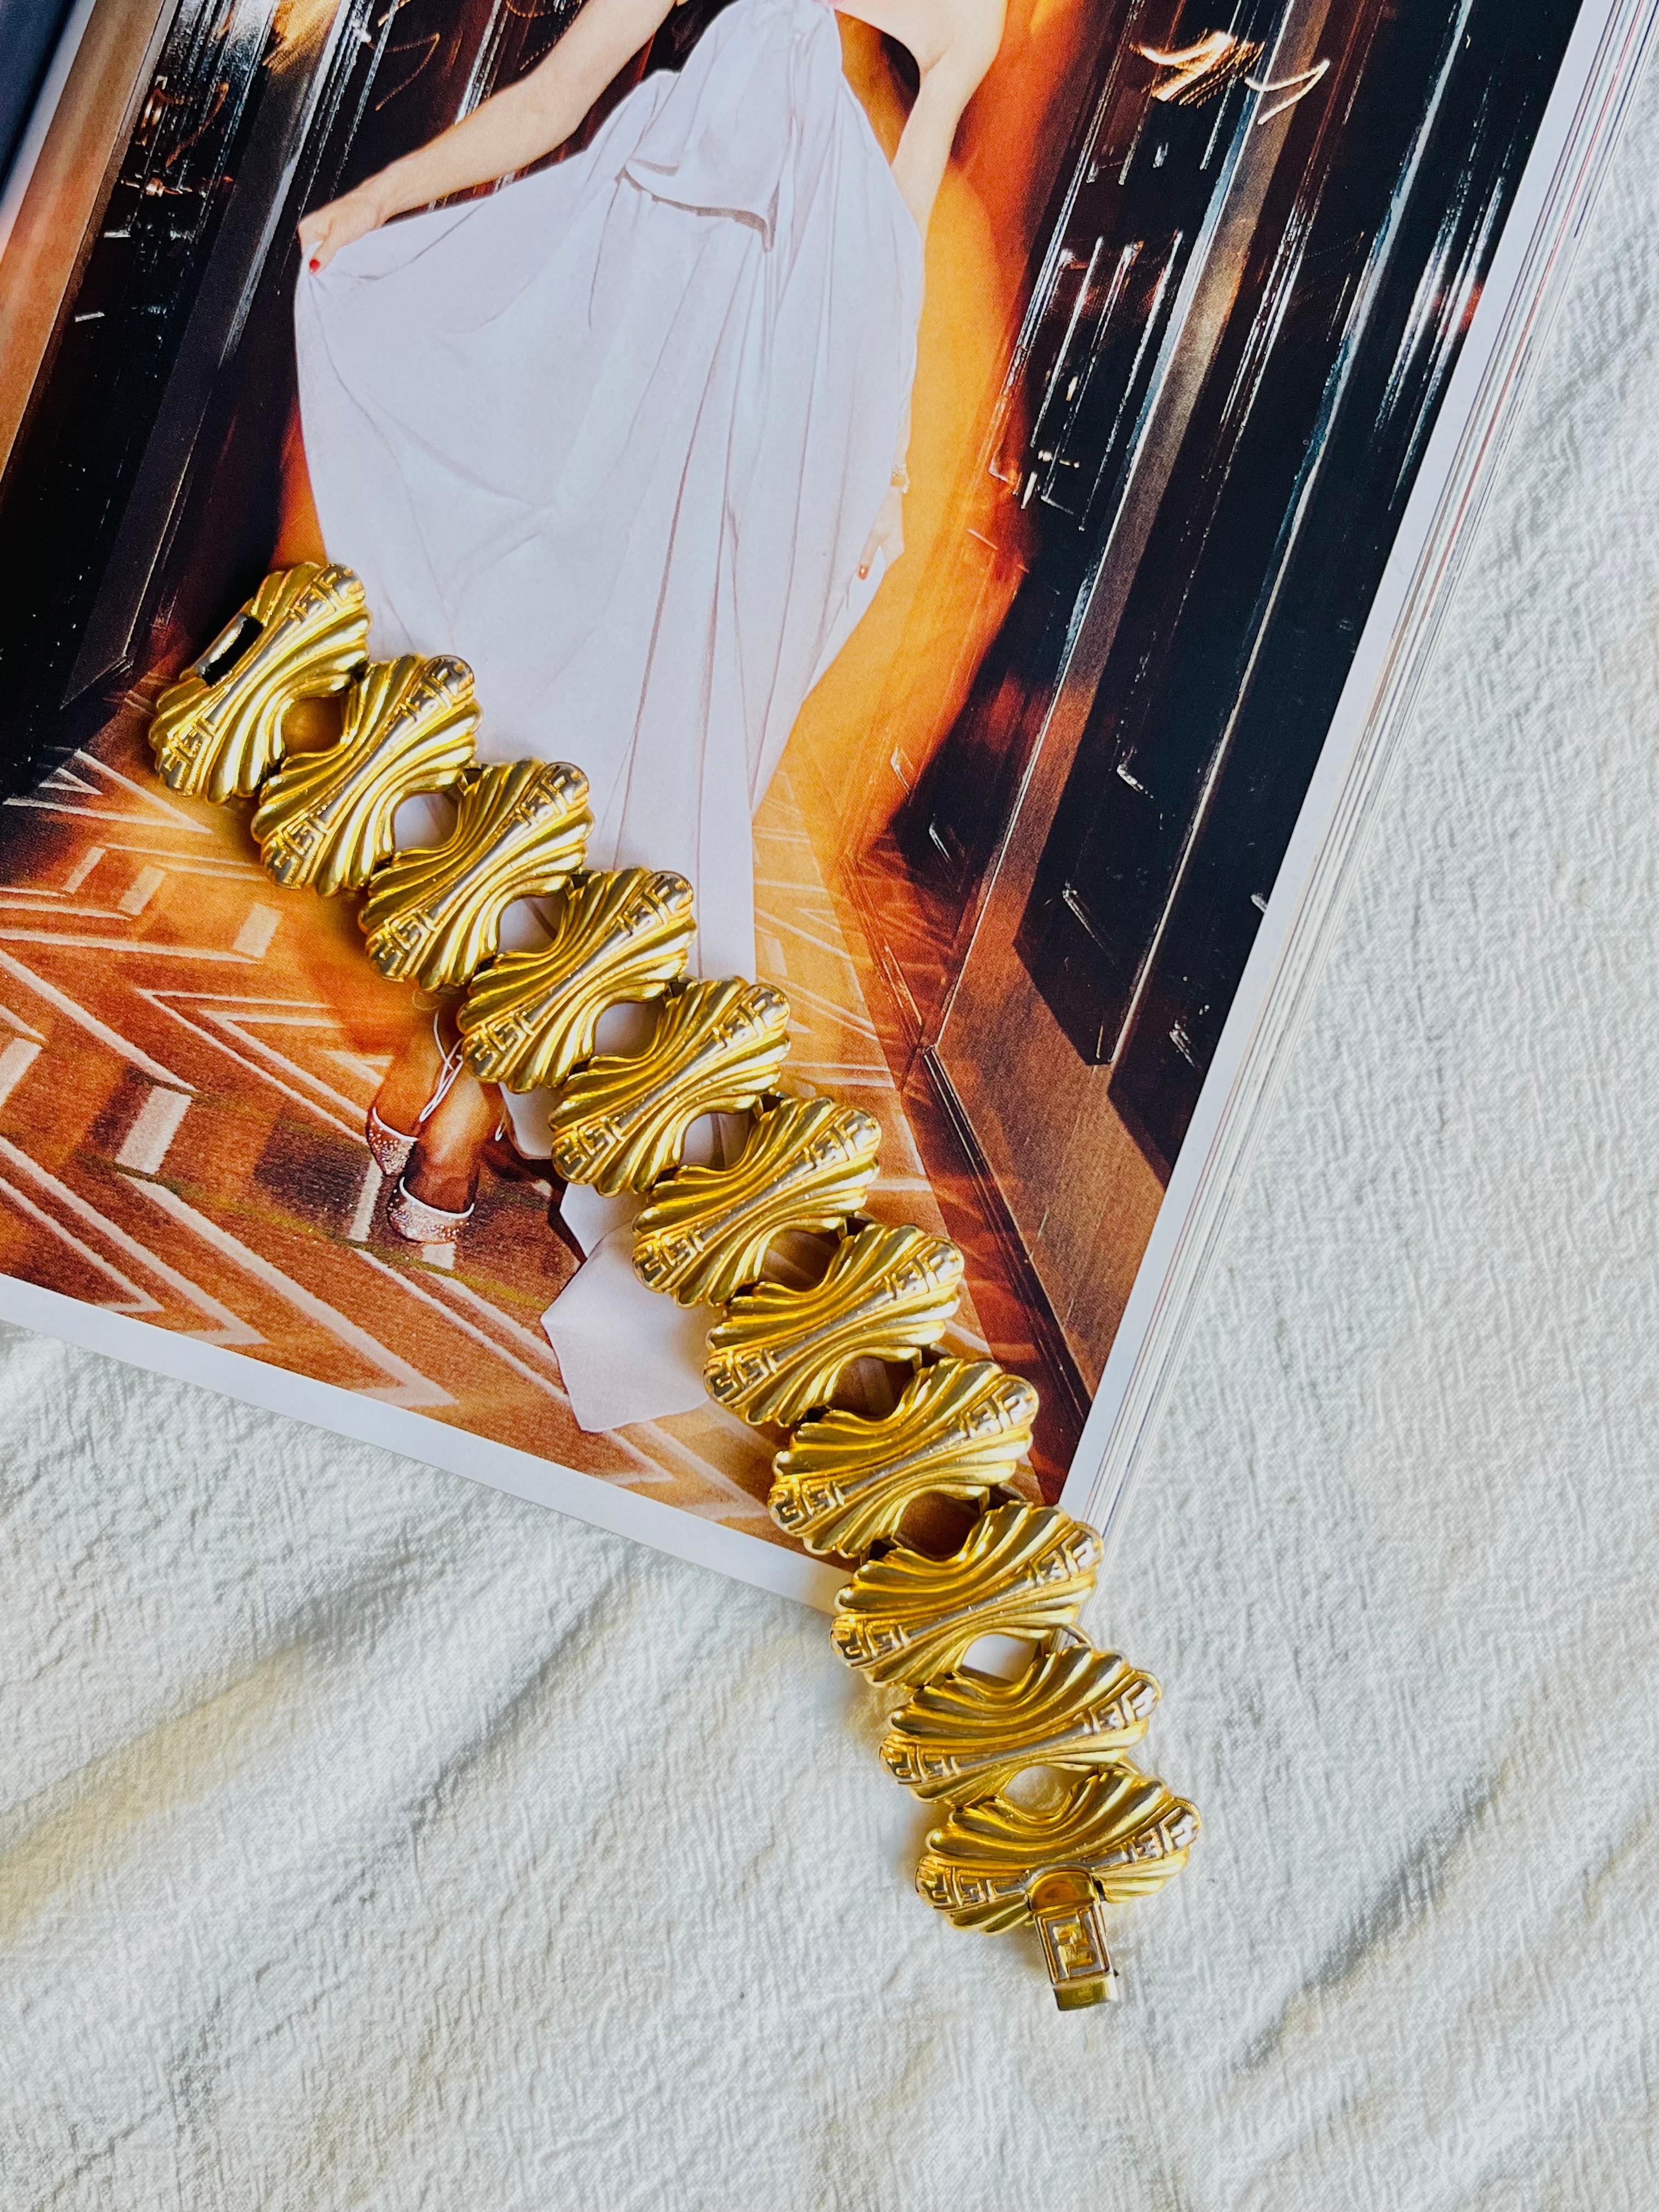 Good condition. Scratches or colour loss at front and back. Still very good to wear. 100% genuine.

A very beautiful bracelet, signed at the back.

Size: 18*3 cm.

Weight: 70 g.

_ _ _

Great for everyday wear. Come with velvet pouch and beautiful